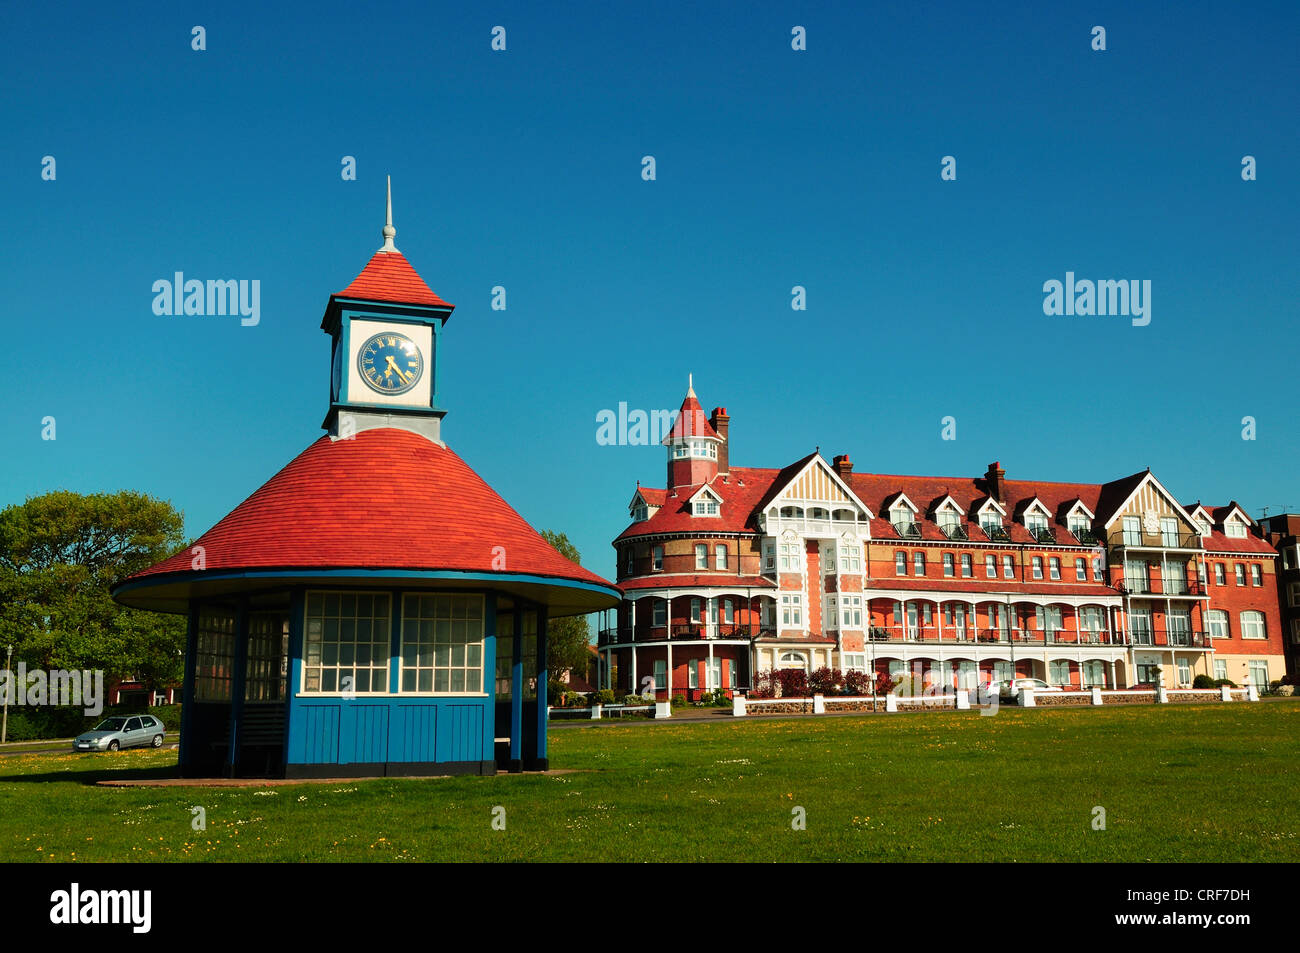 Landmark pavilion and period apartment building by seafront, Frinton in Essex Stock Photo